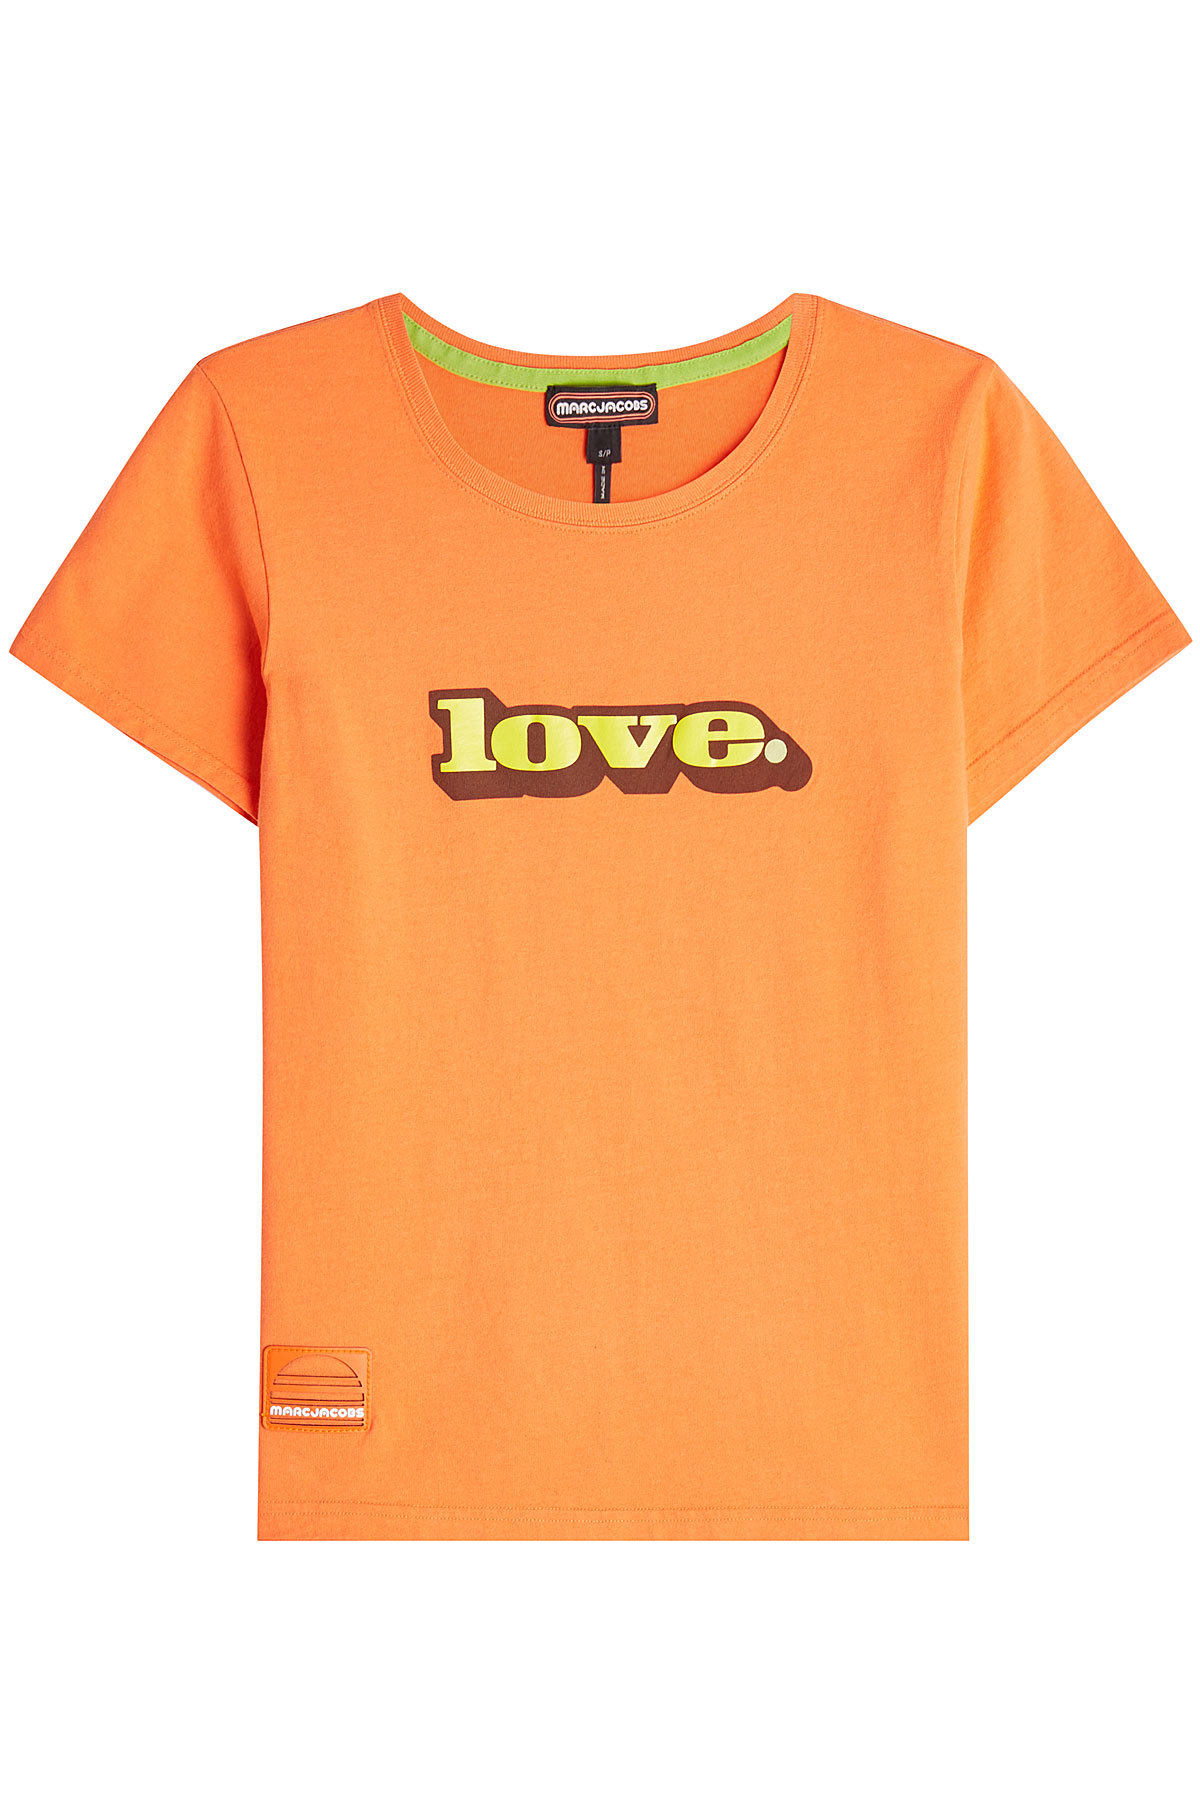 Love Cotton T-Shirt by Marc Jacobs